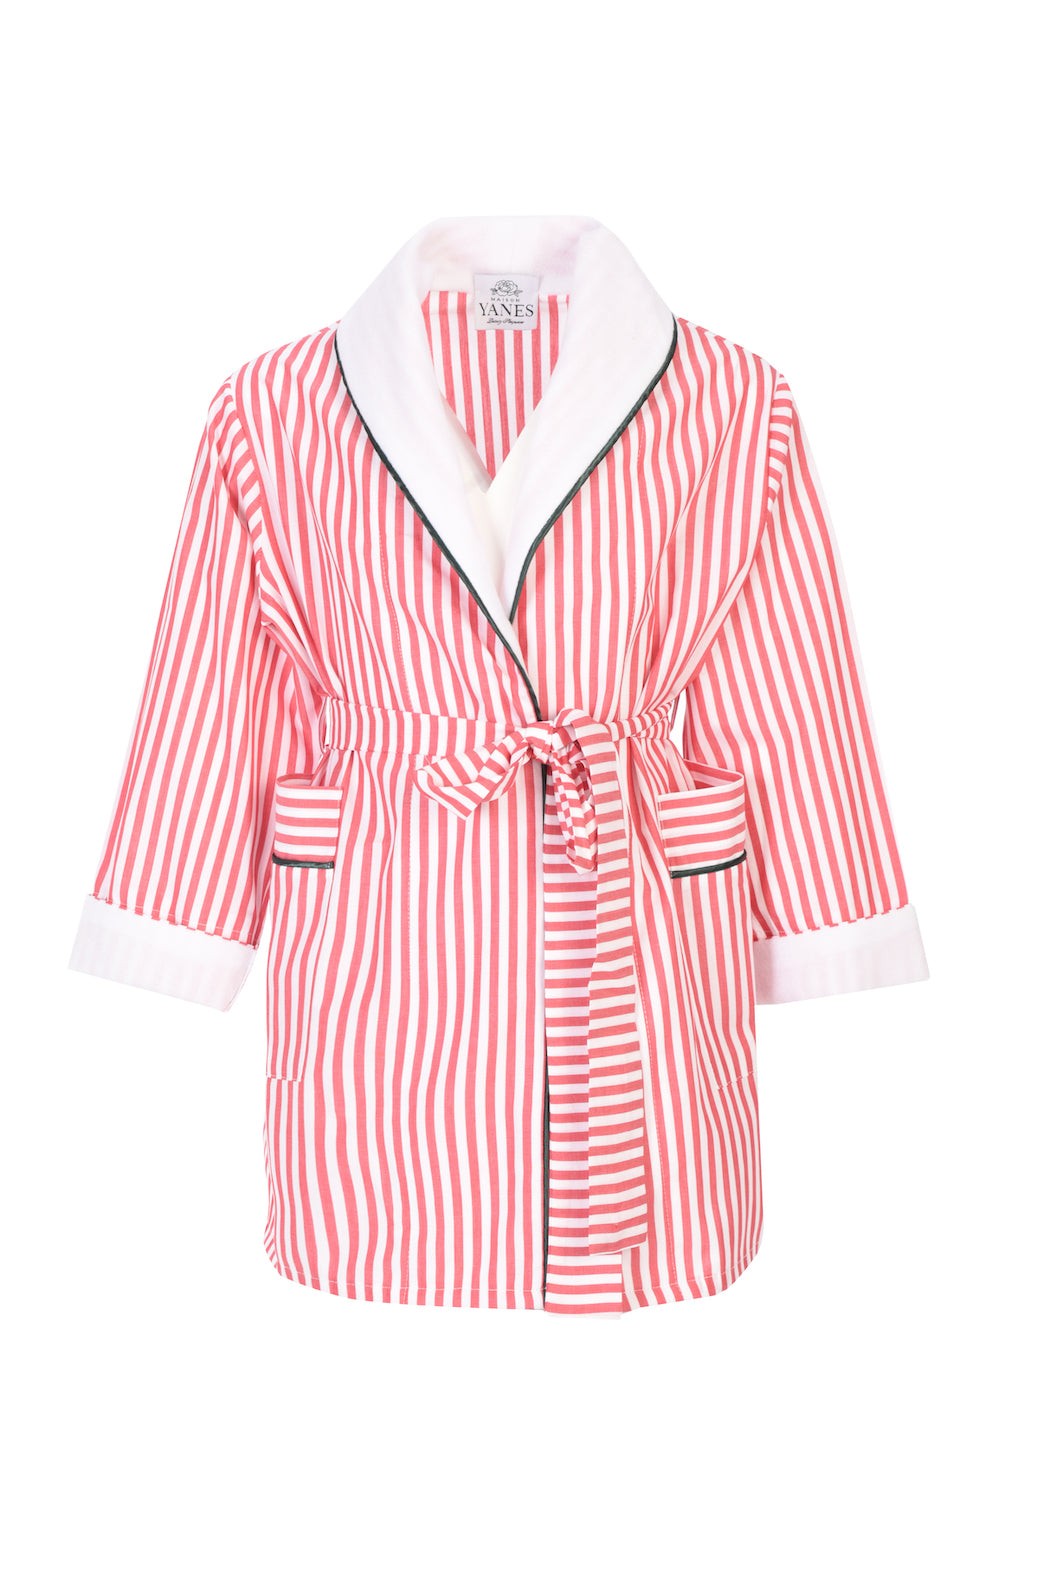 Red Stripes Robe Kids Dressing Gown